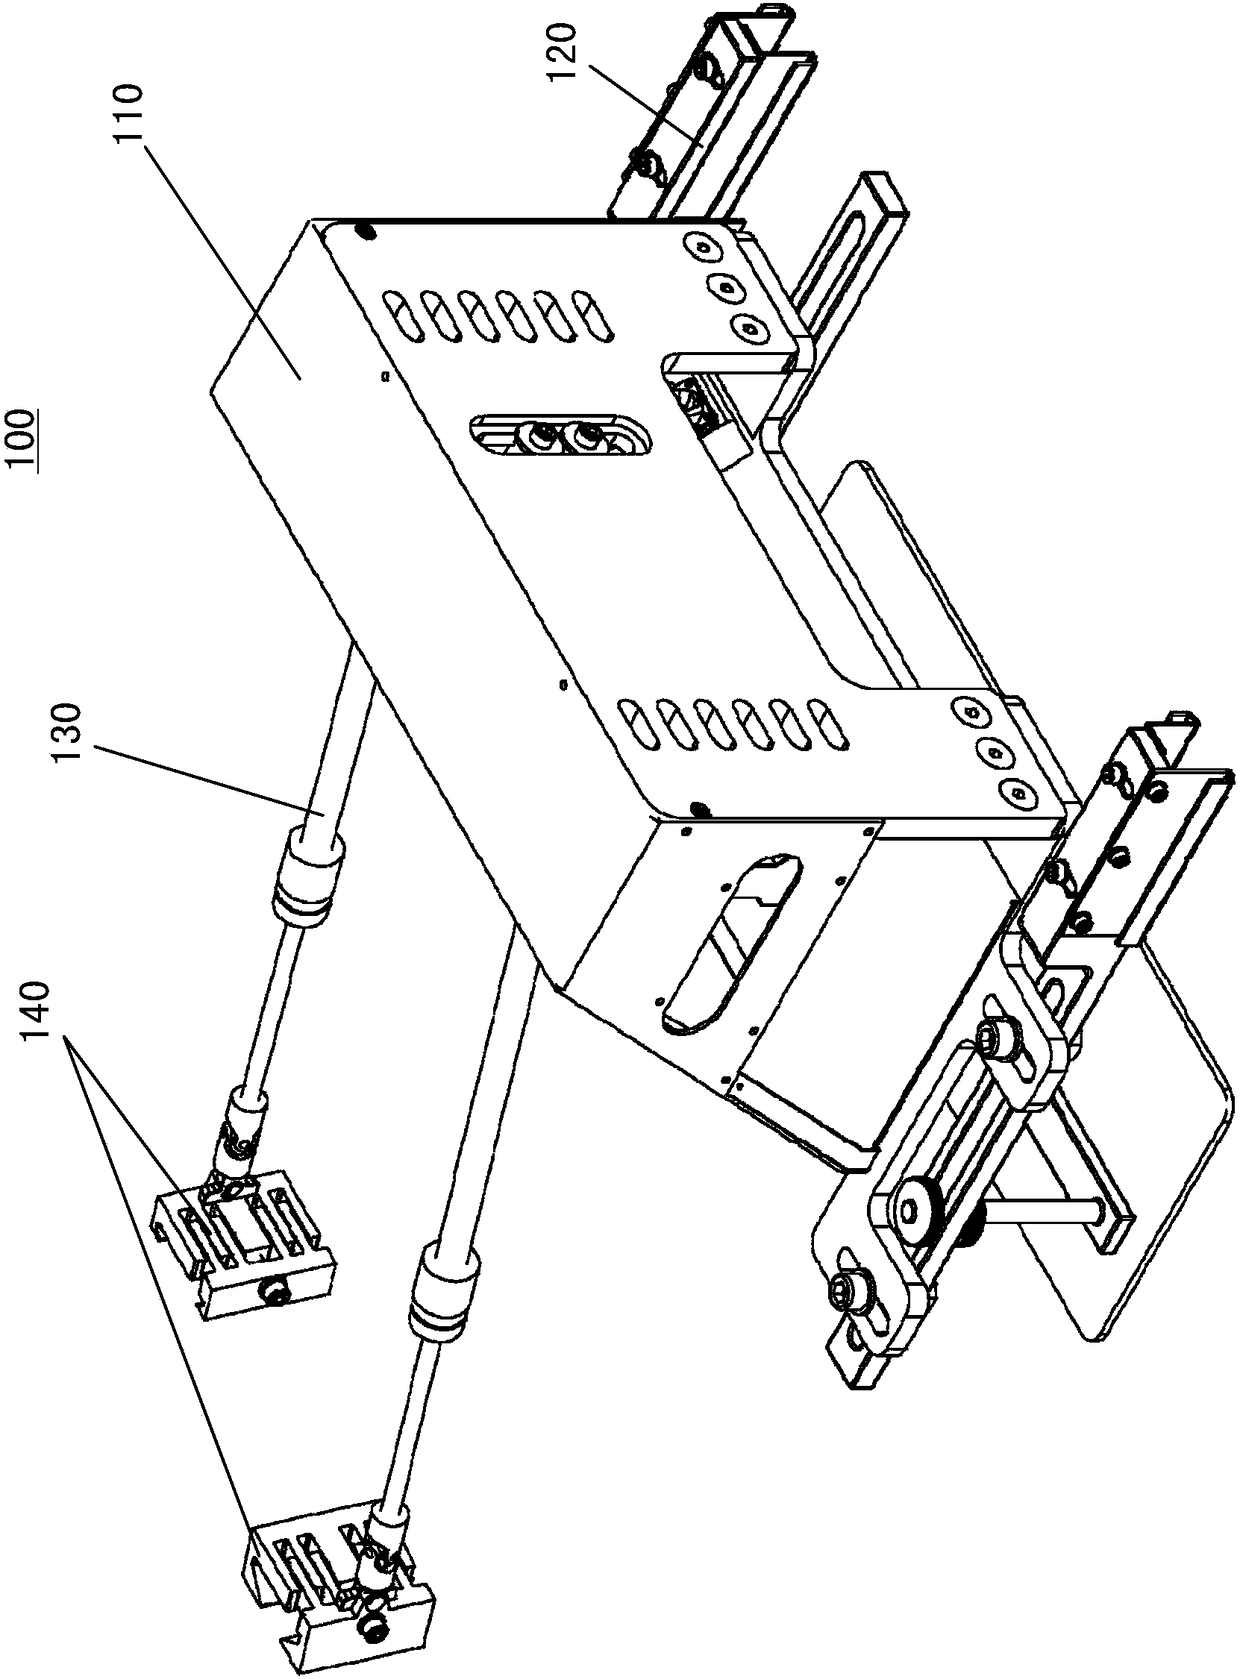 Connecting rod control device